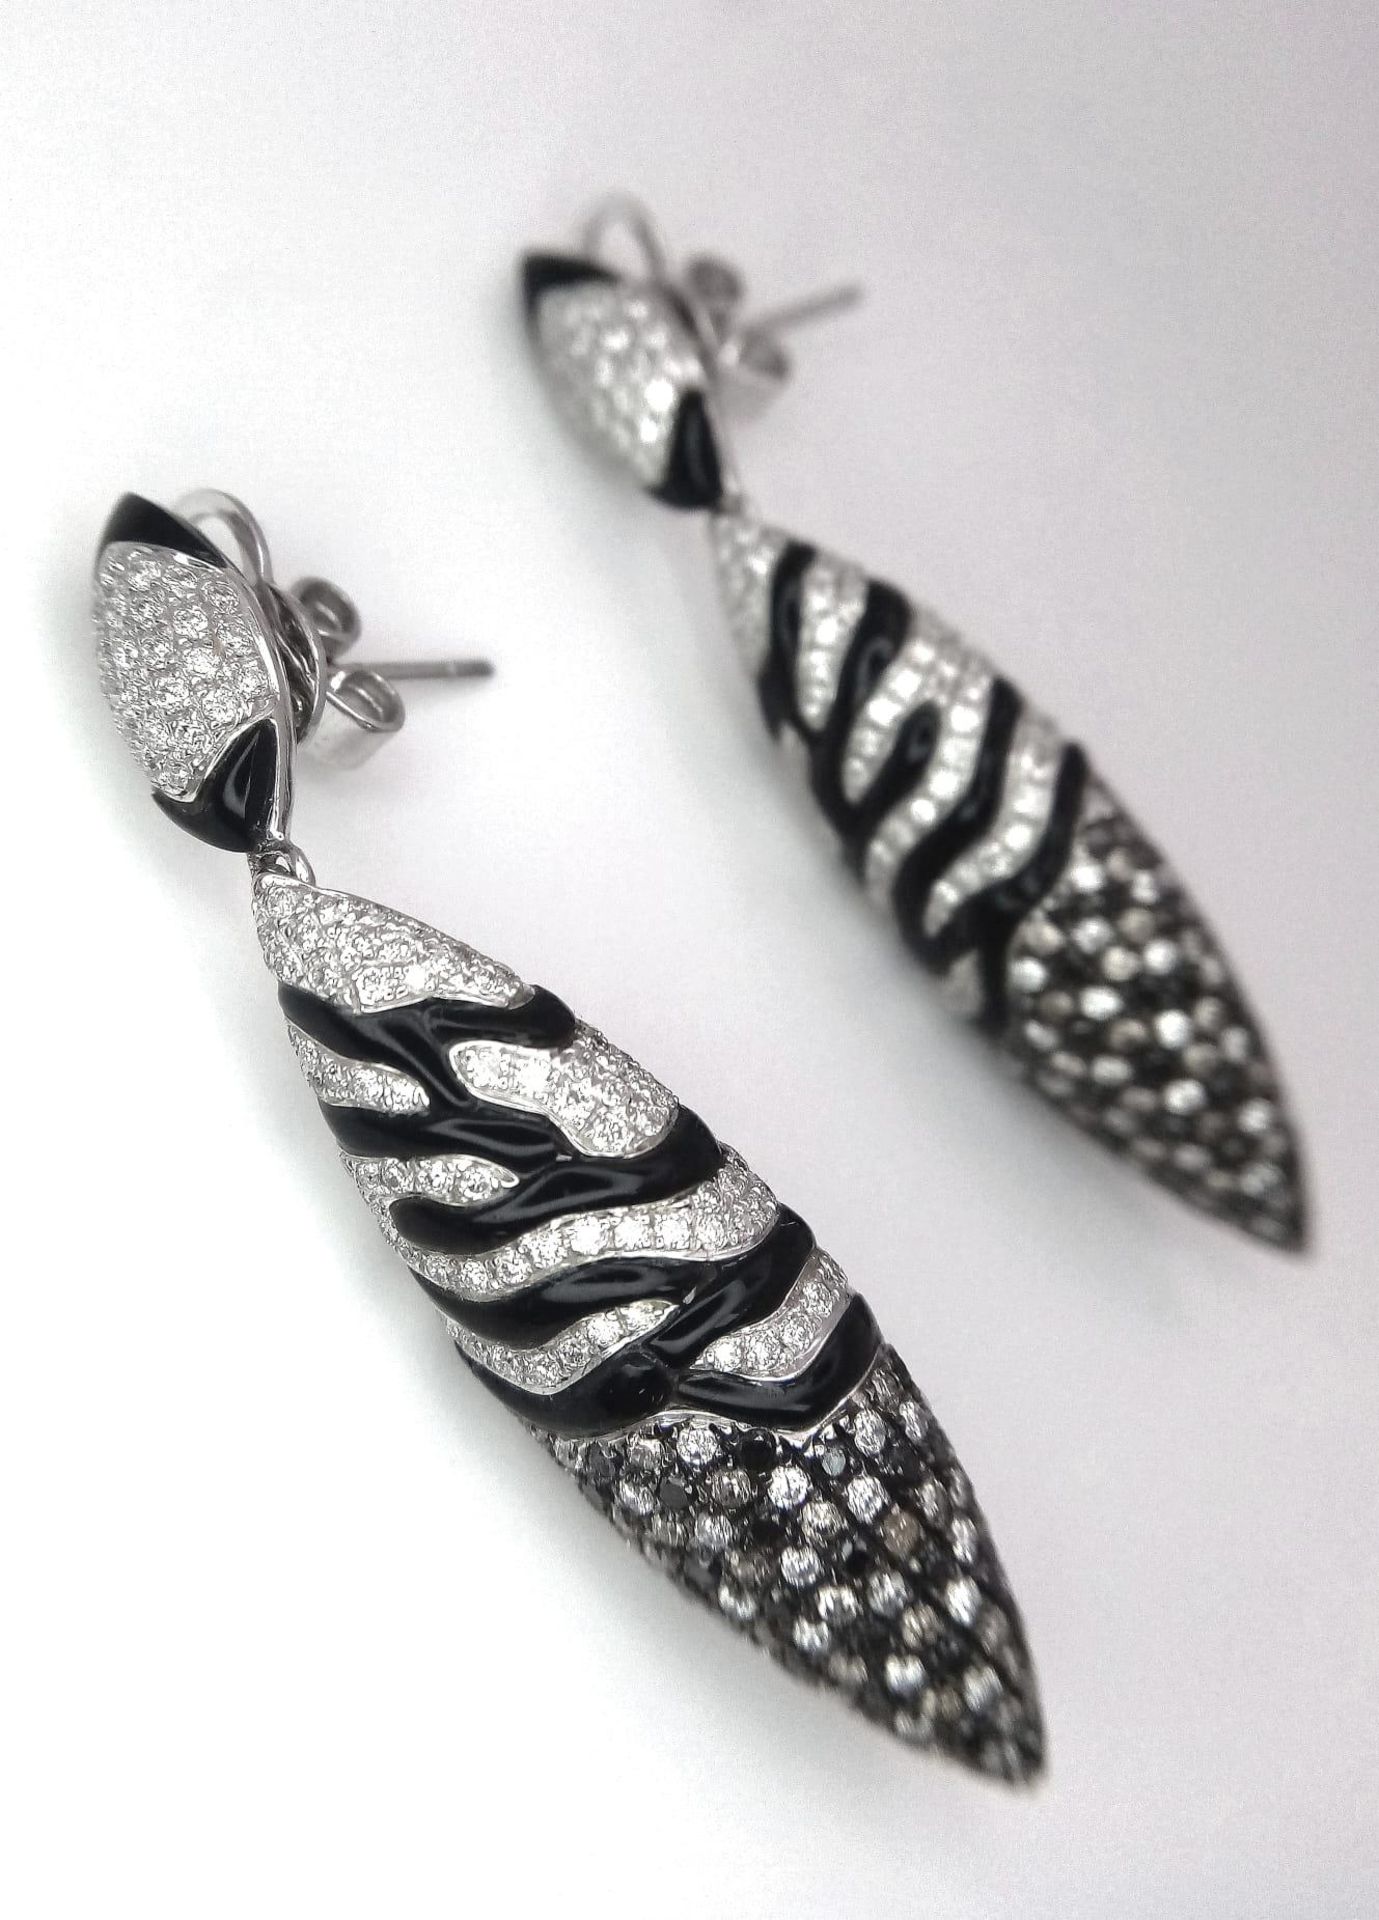 Stunning pair of 18kt White Gold, Diamond encrusted Drop Earrings. A unique 'pea-pod ' design